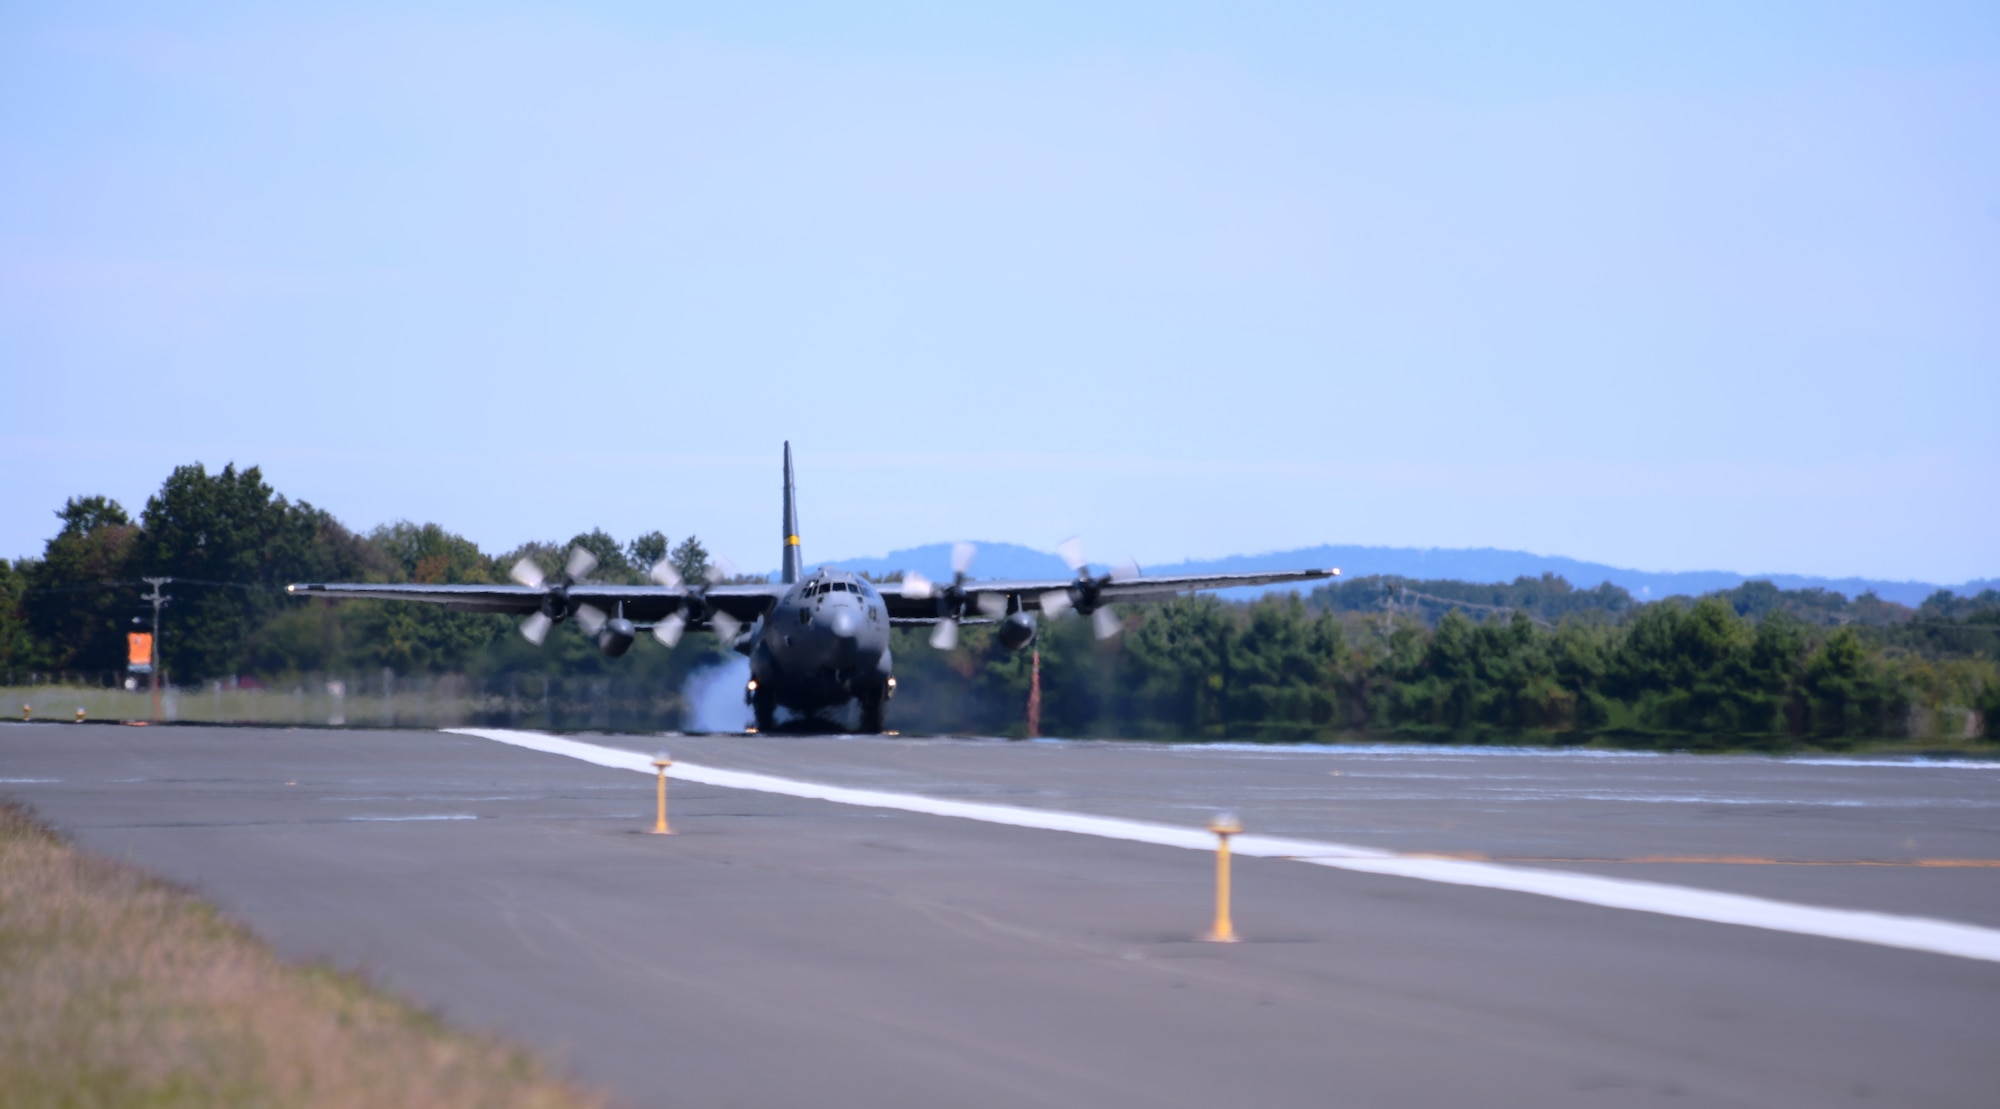 The first of eight C-130H aircraft to be assigned to the Connecticut Air National Guard’s 103rd Airlift Wing touches down at Bradley International Airport, Windsor Locks, Conn., Tuesday, Sept, 24, 2013. (U.S. Air National Guard photo by Master Sgt. Erin McNamara)